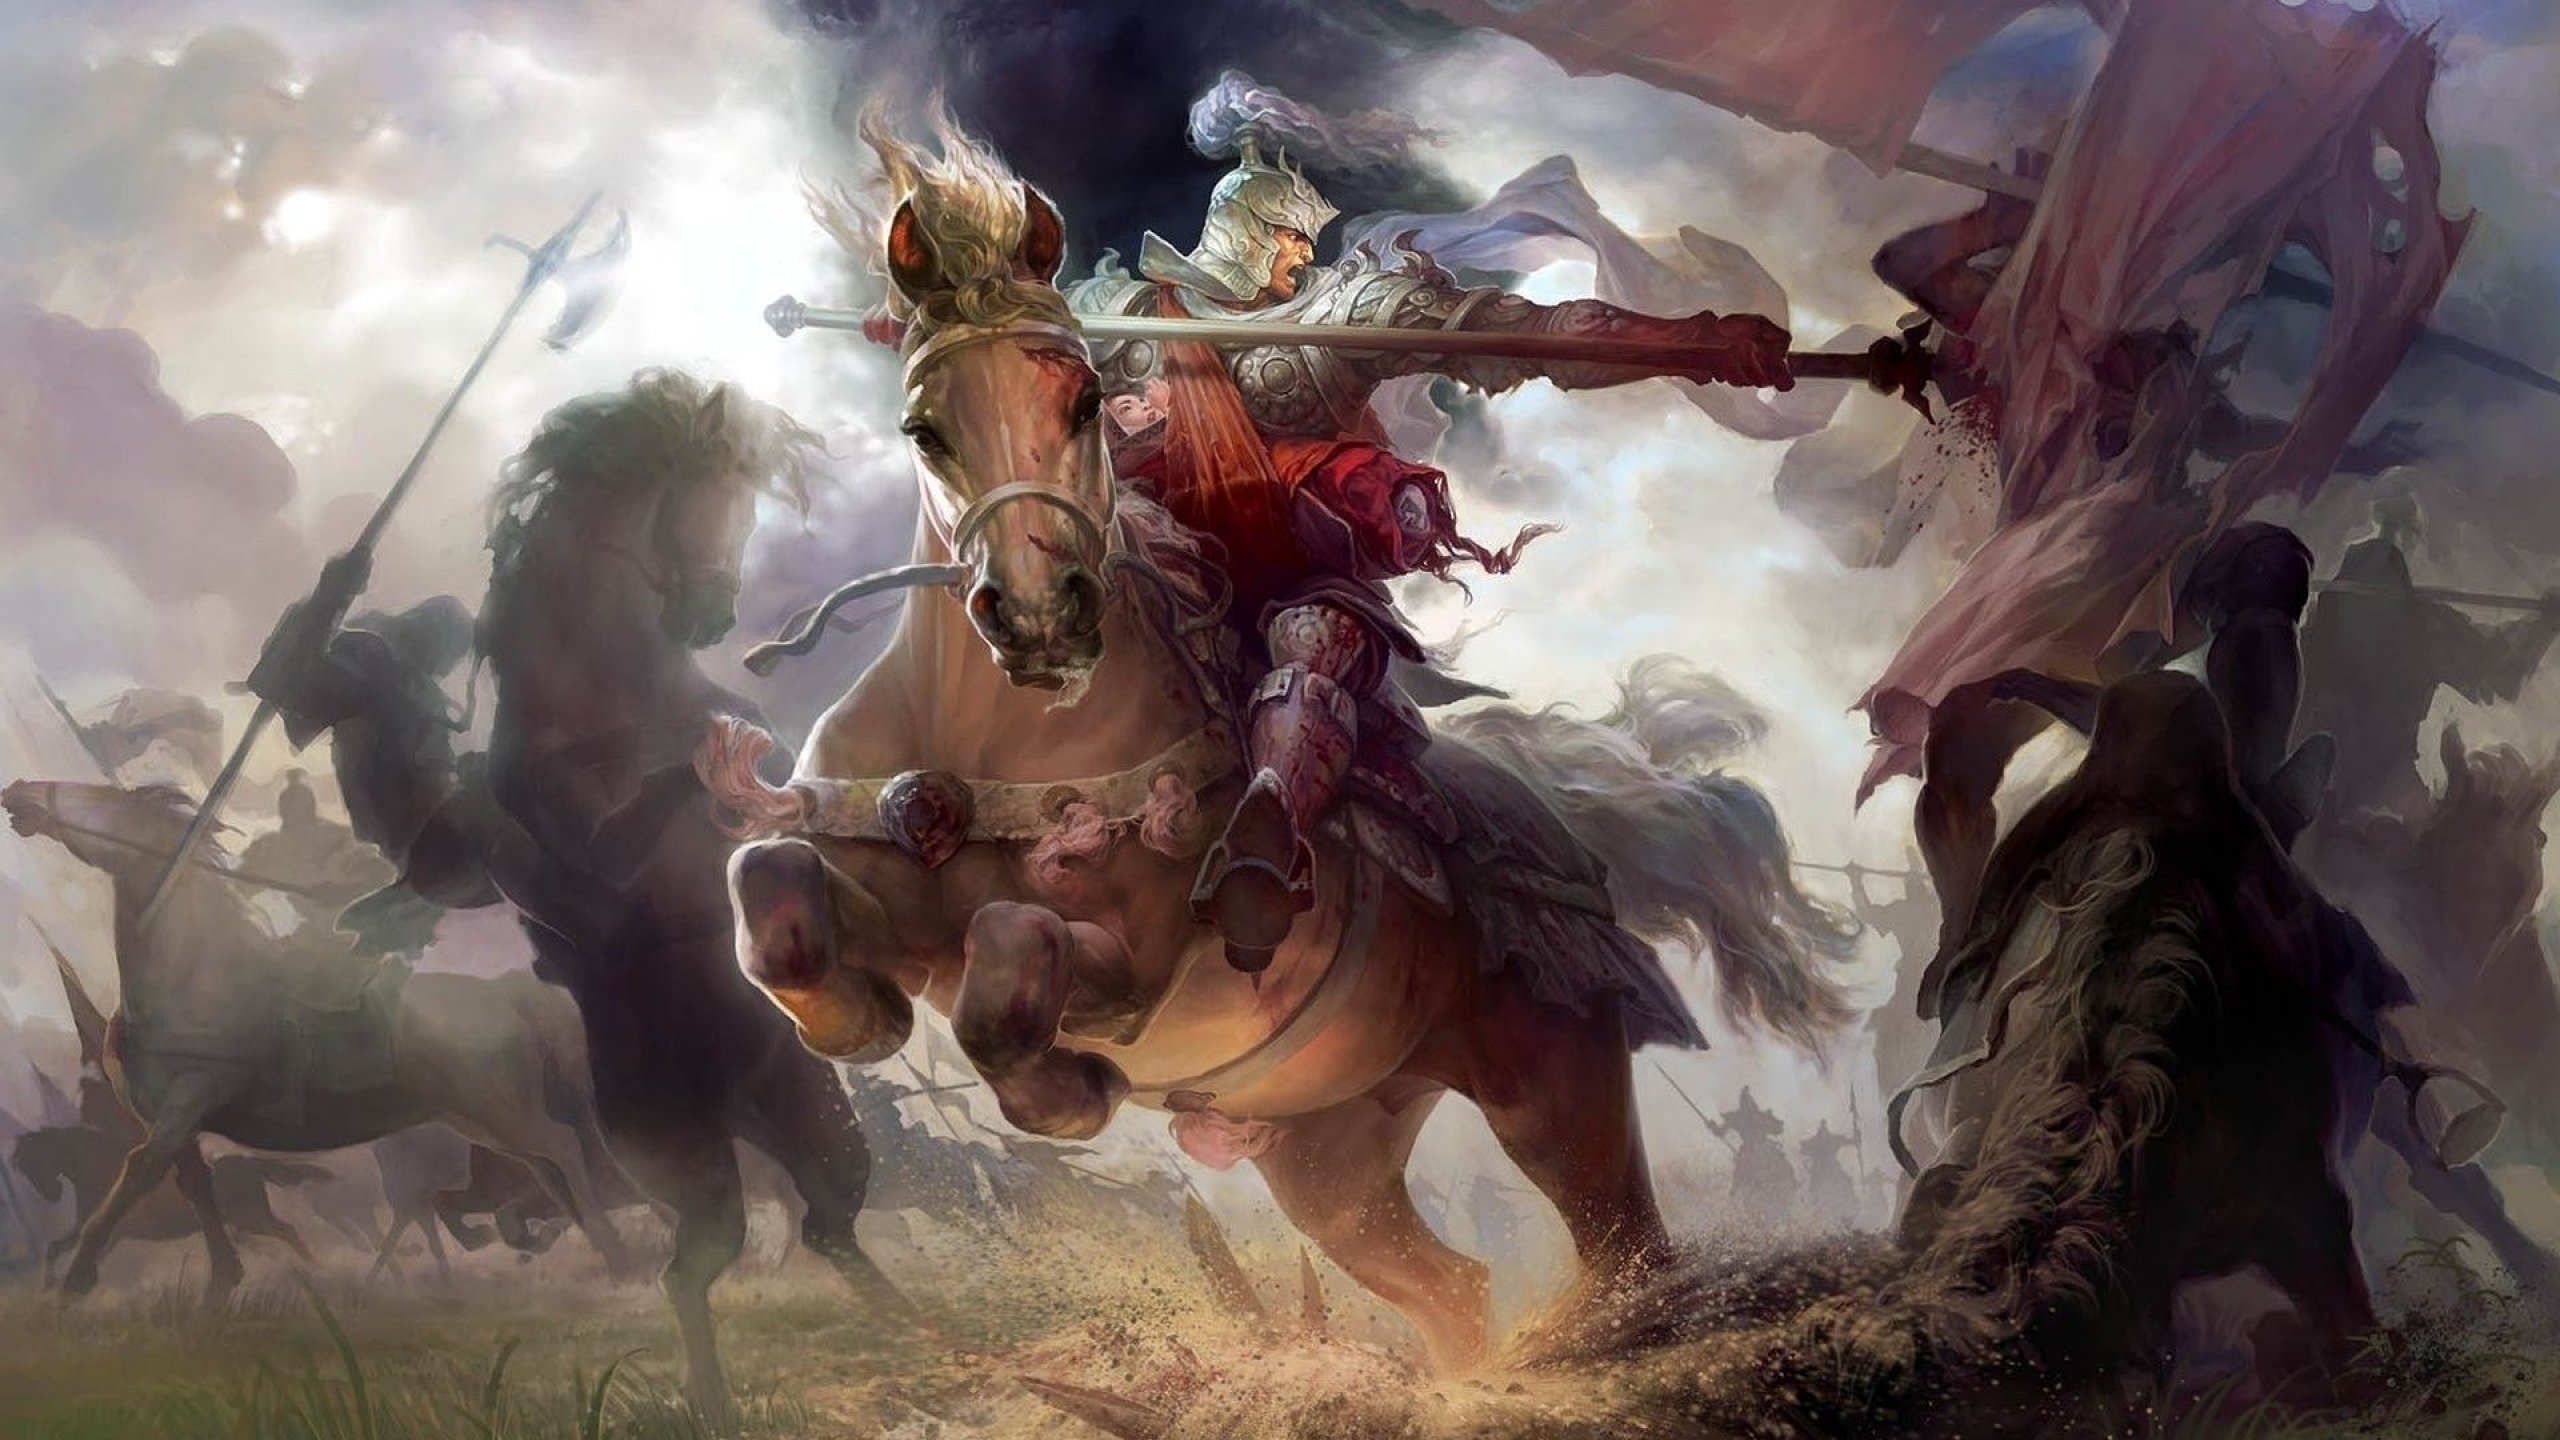 heroes, Might, Magic, Strategy, Fantasy, Fighting, Adventure, Action, Online, 1hmm, Warrior, Battle, Horse, Armor, Knight Wallpaper